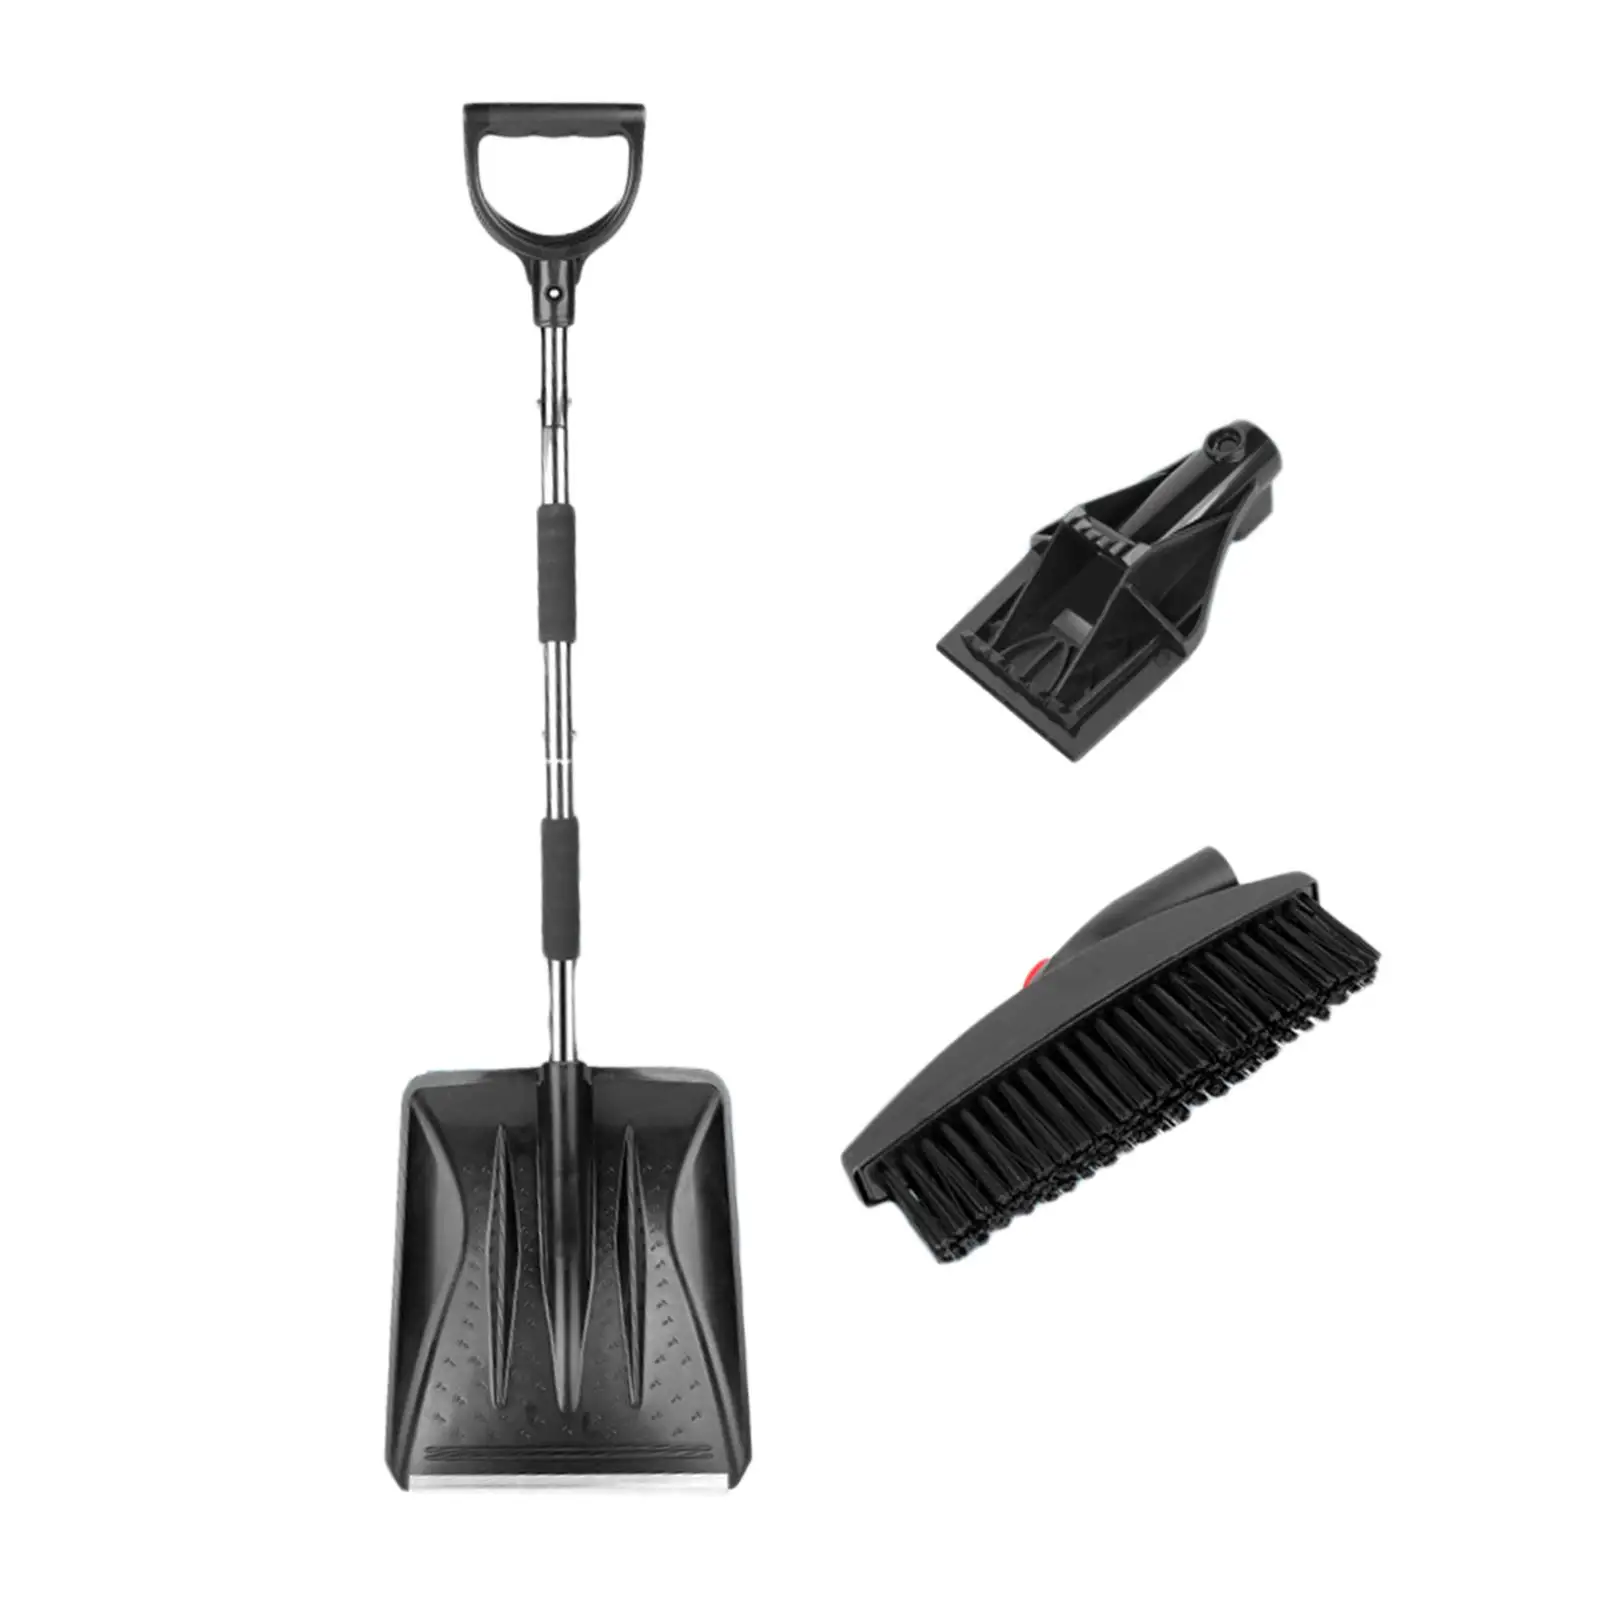 Snow Brush Scraper Snow Shovel for Car 3 in 1 Comfortable Gripping Auto Durable Car Defrosting Scraper Snow Removal Tools